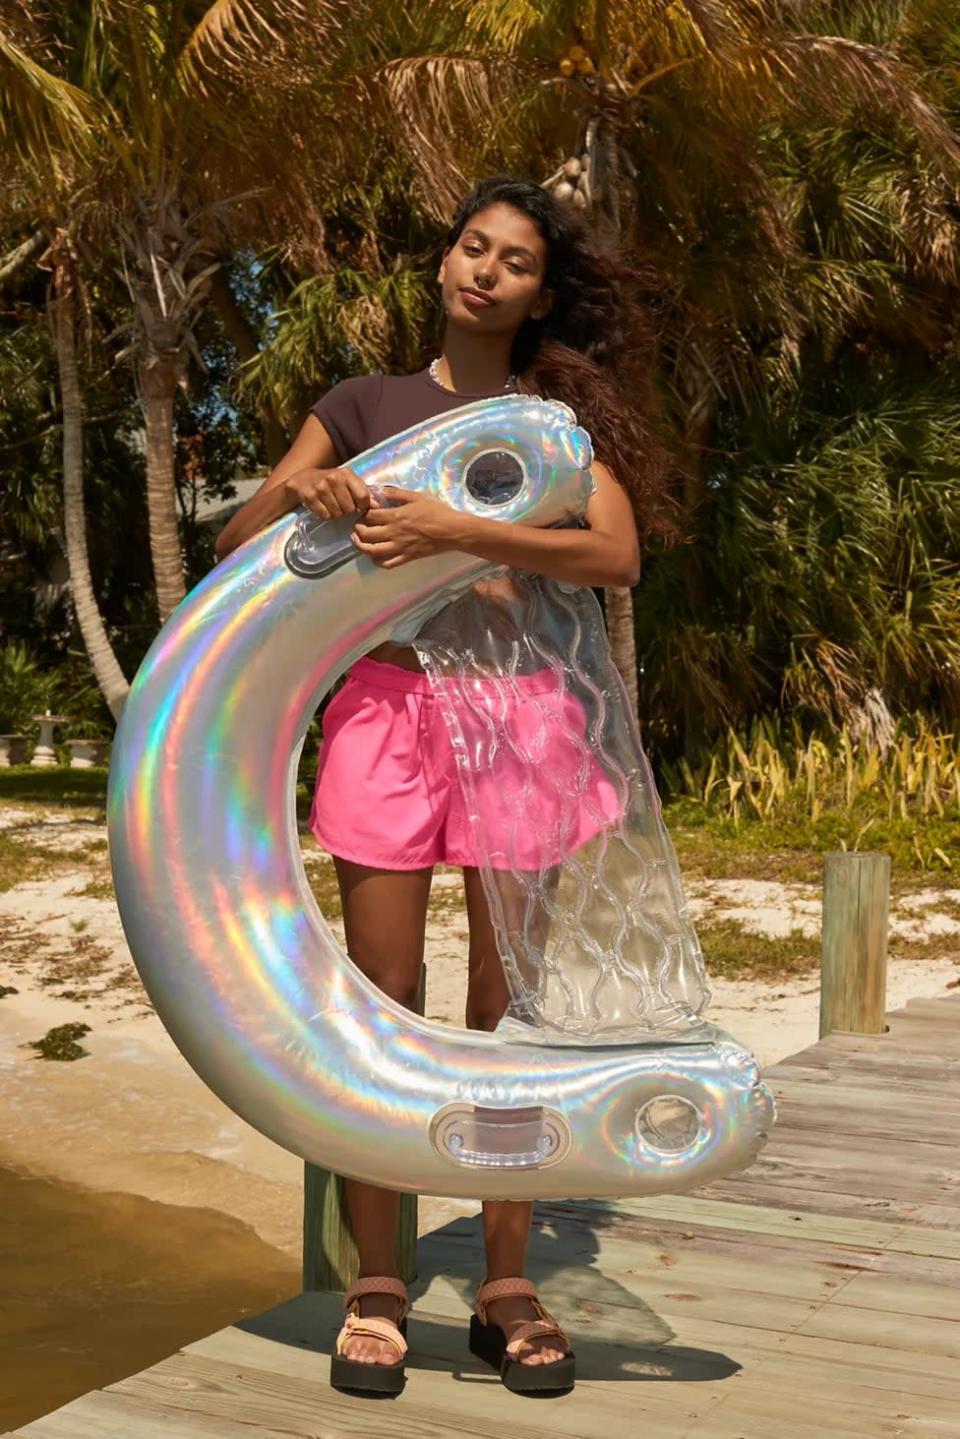 <p>If you're living for all things glittery, the <span>Glitter Chair Pool Float</span> ($25) is something you need in your collection. It's equipped with a supportive backrest, two cup holders, and two handles for comfort floating. It comes in an iridescent silver shade, a glittery pink shade, and a glittery orange-yellow shade. </p>